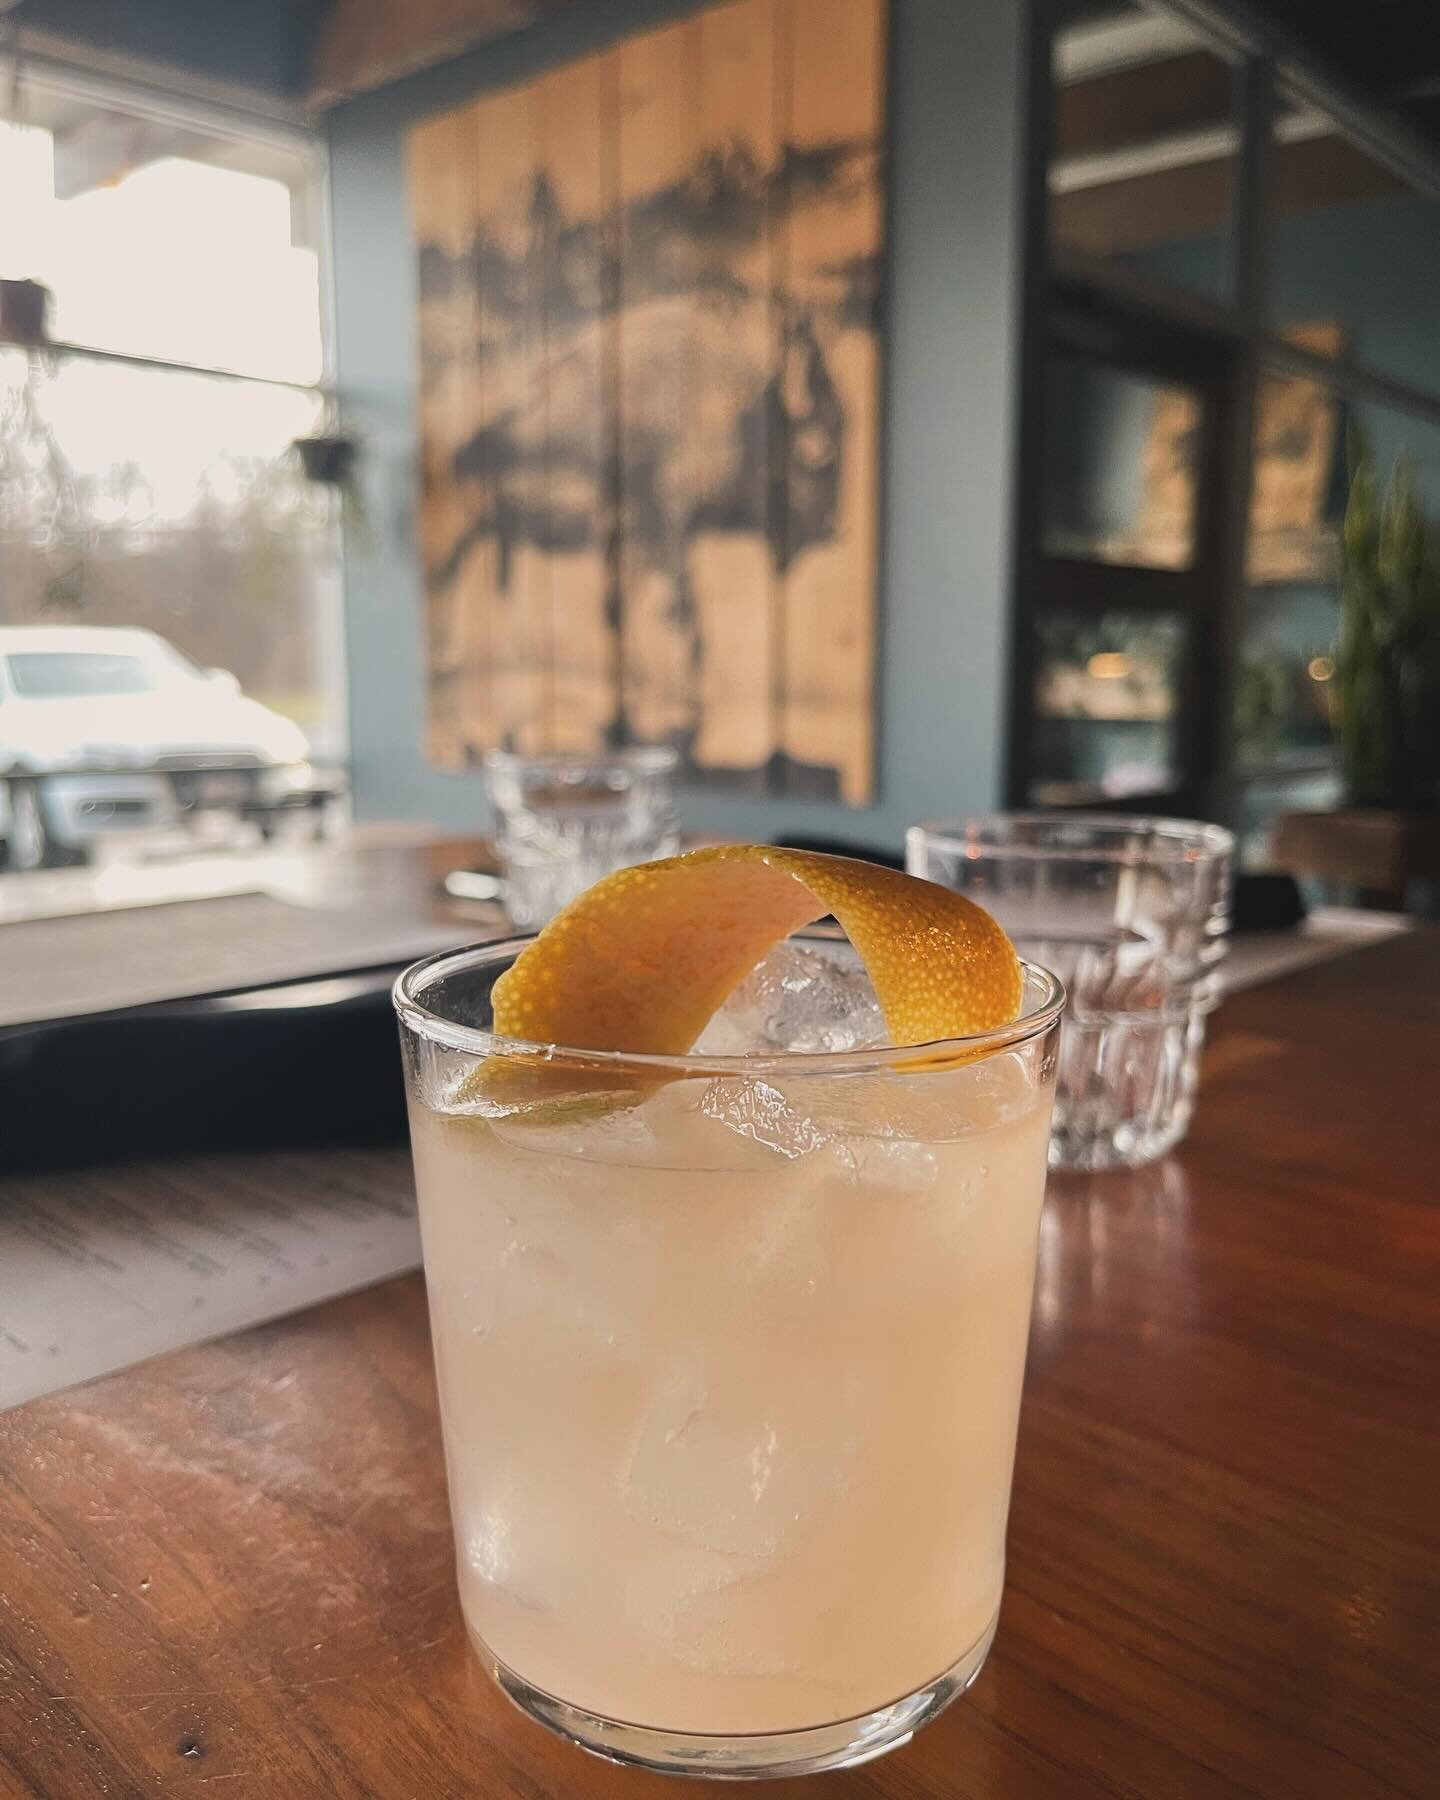 While you&rsquo;re on lunch at the office today, dreaming about 5pm, think about our signature paloma. 🍹✨ It&rsquo;s the perfect refresher after you finally get over the hump, made with @tequila_arette &amp; house made citrus cordial with fresh sque